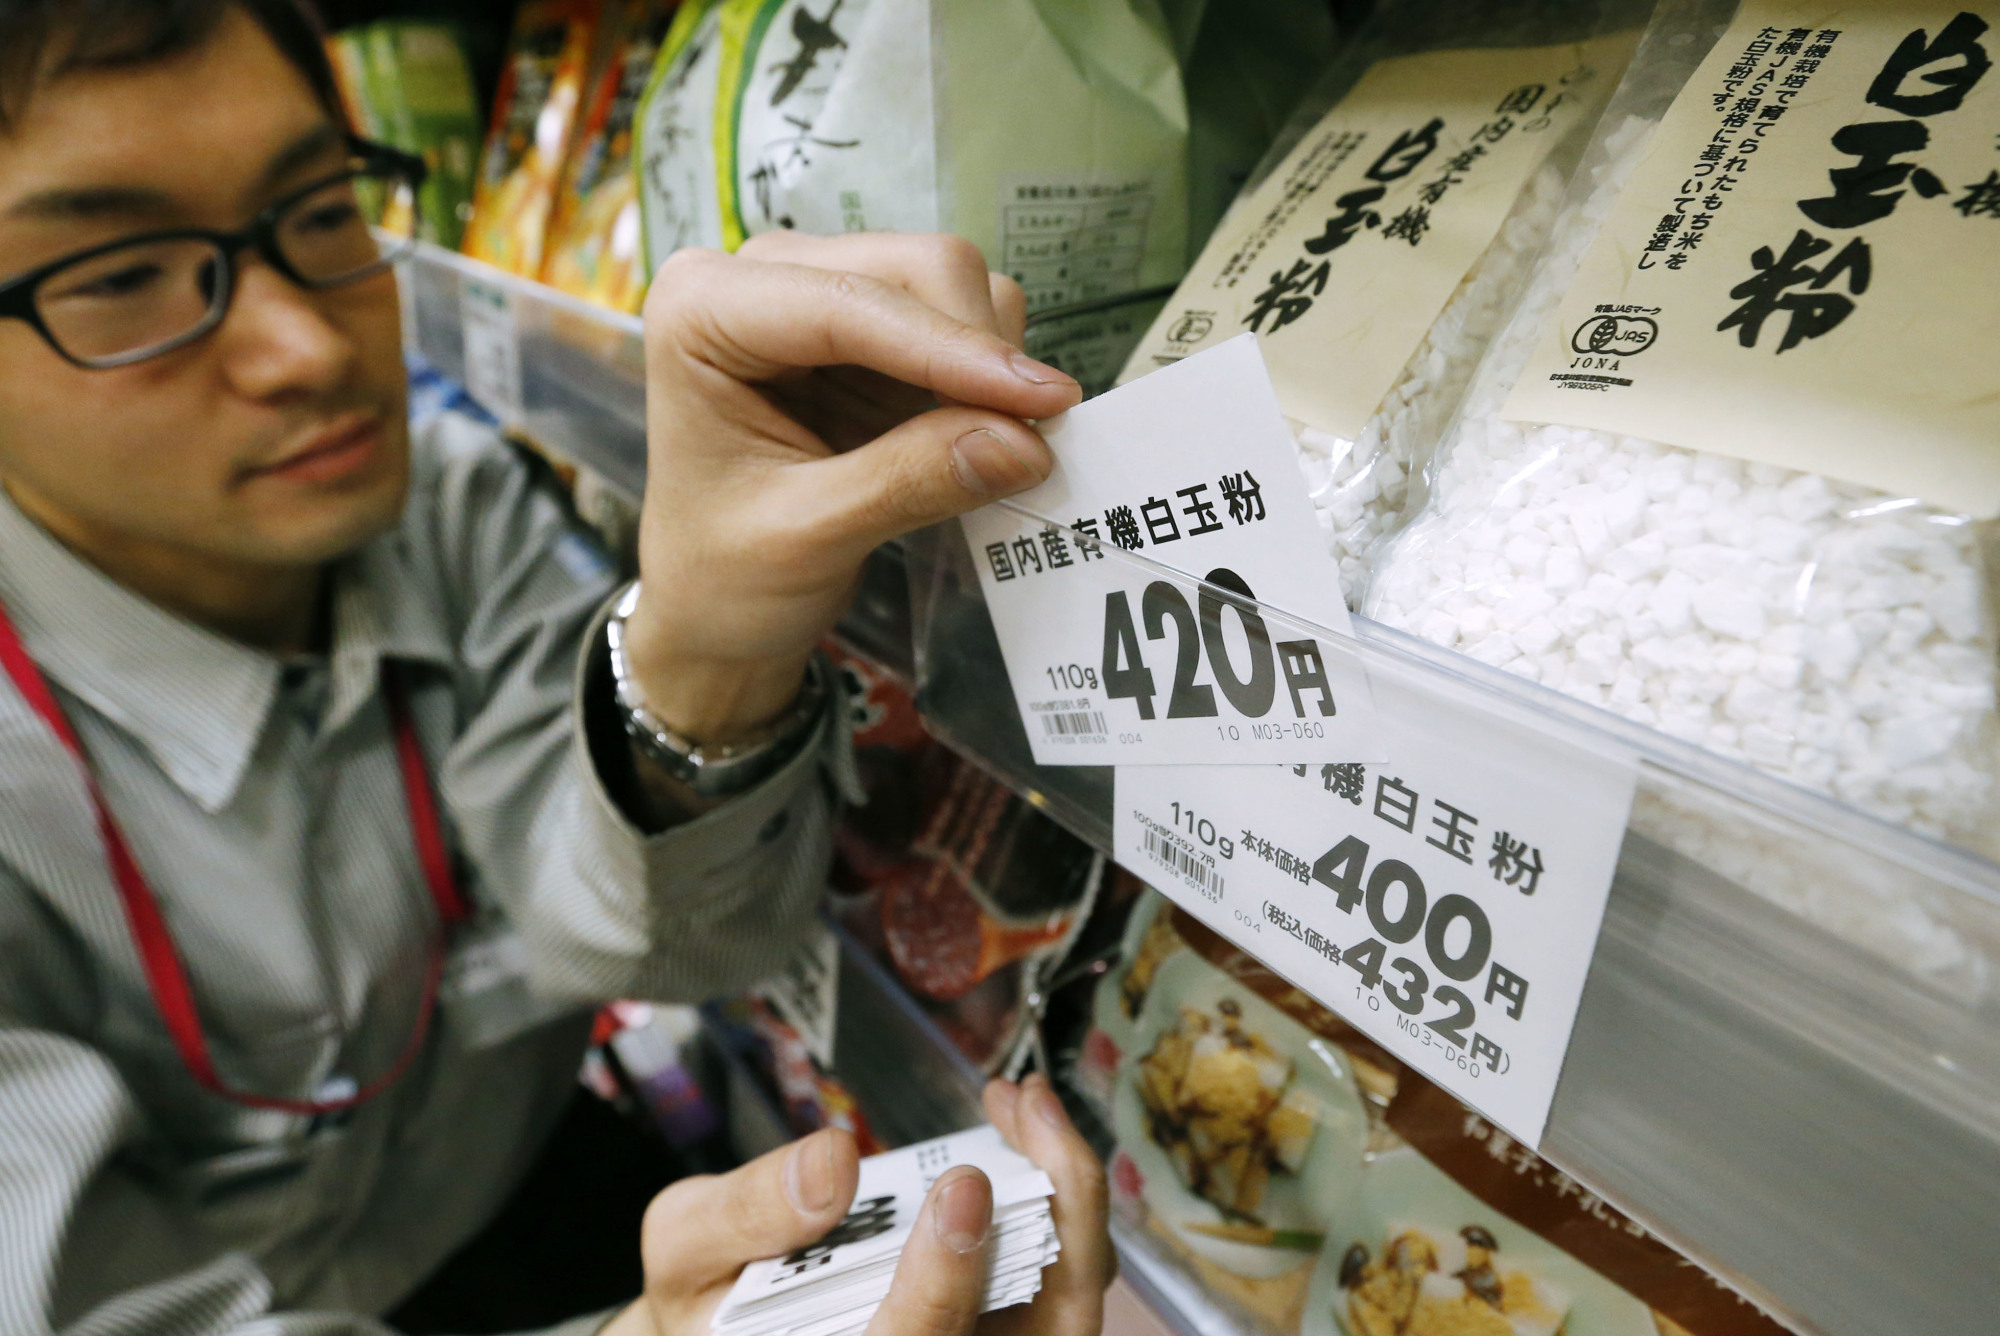 A supermarket worker replaces a price tag before Japan raised the consumption tax to 8 percent from 5 percent in 2014. | KYODO